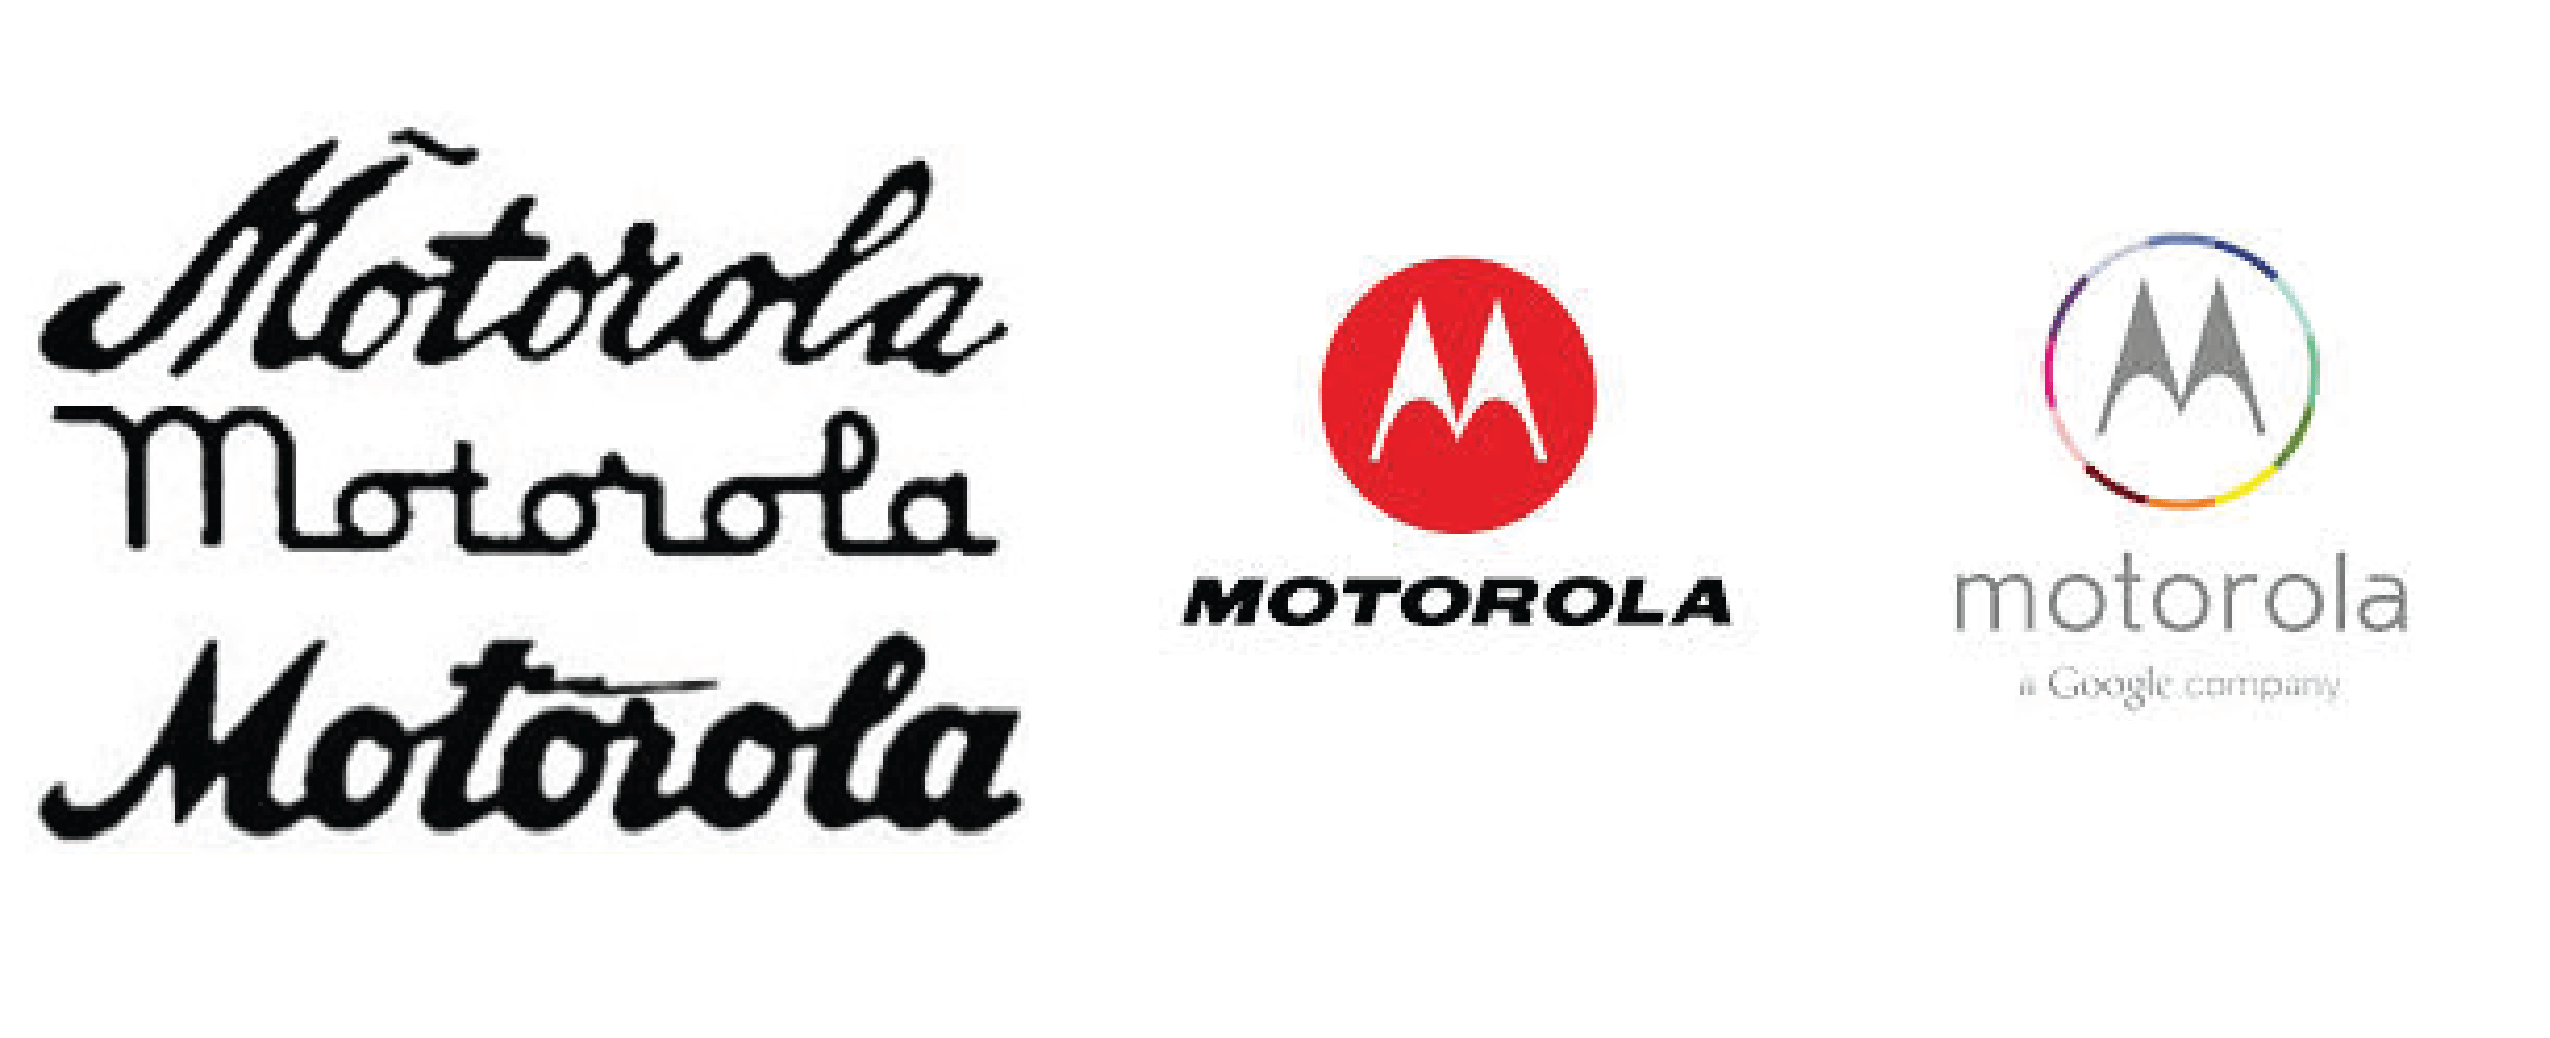 First Motorola Logo - A Look Back at Some Mobile Industry Logos - Top Mobile Trends